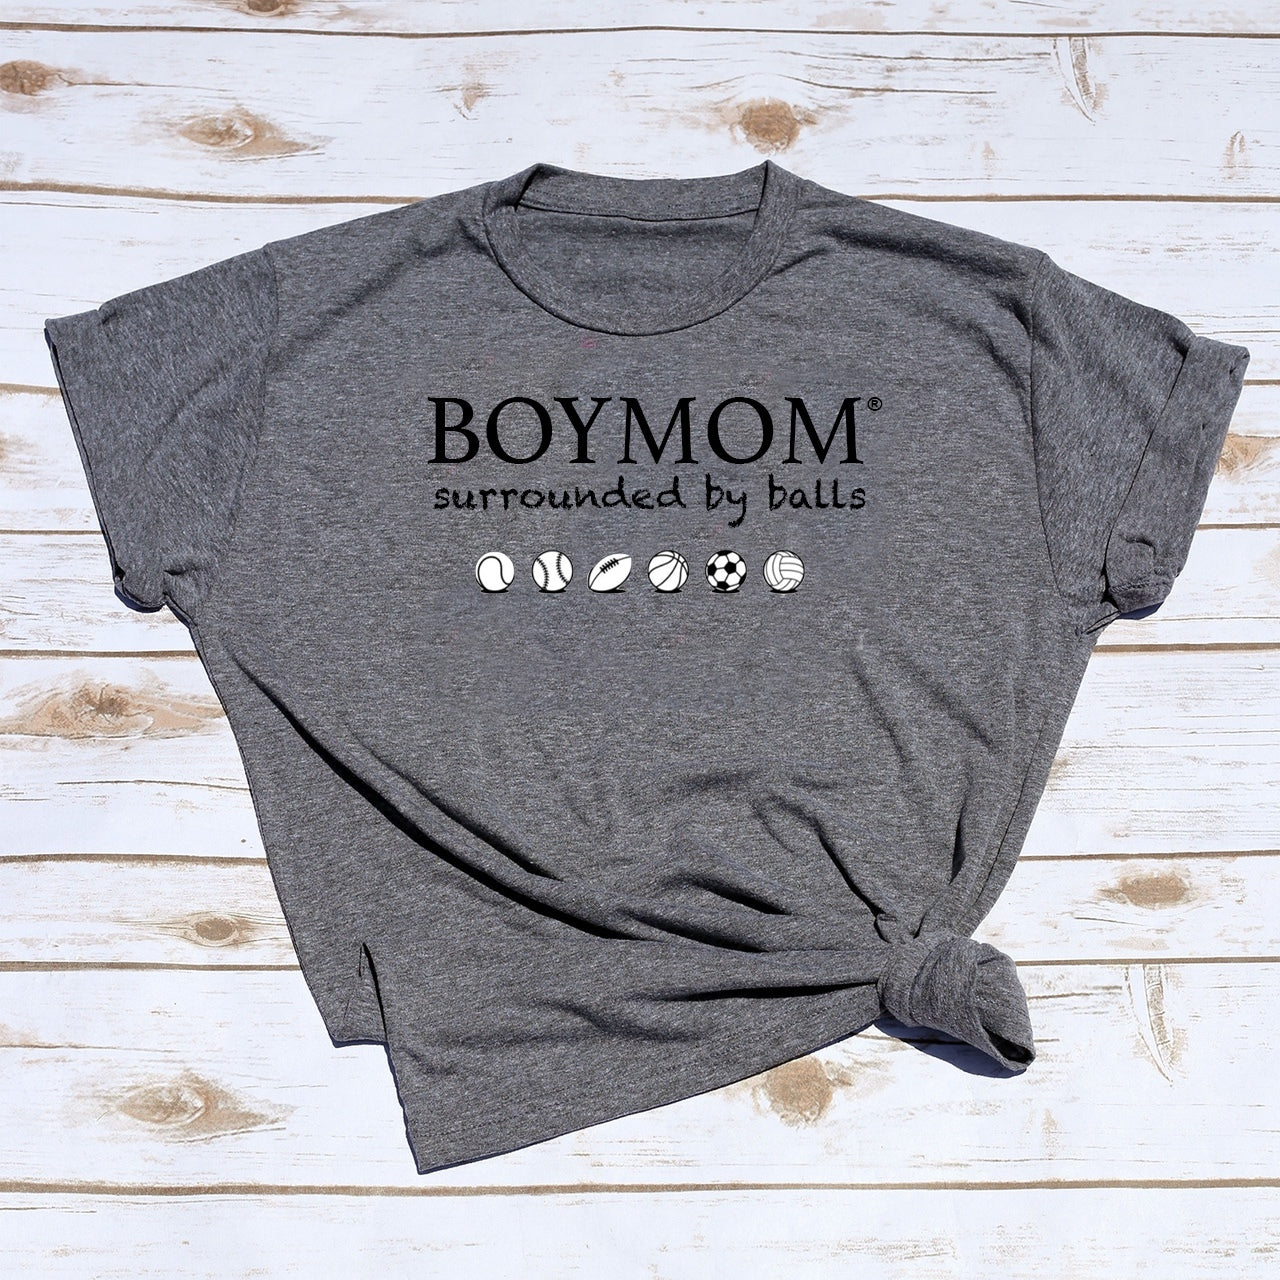 Boymom Surrounded by Balls Tee